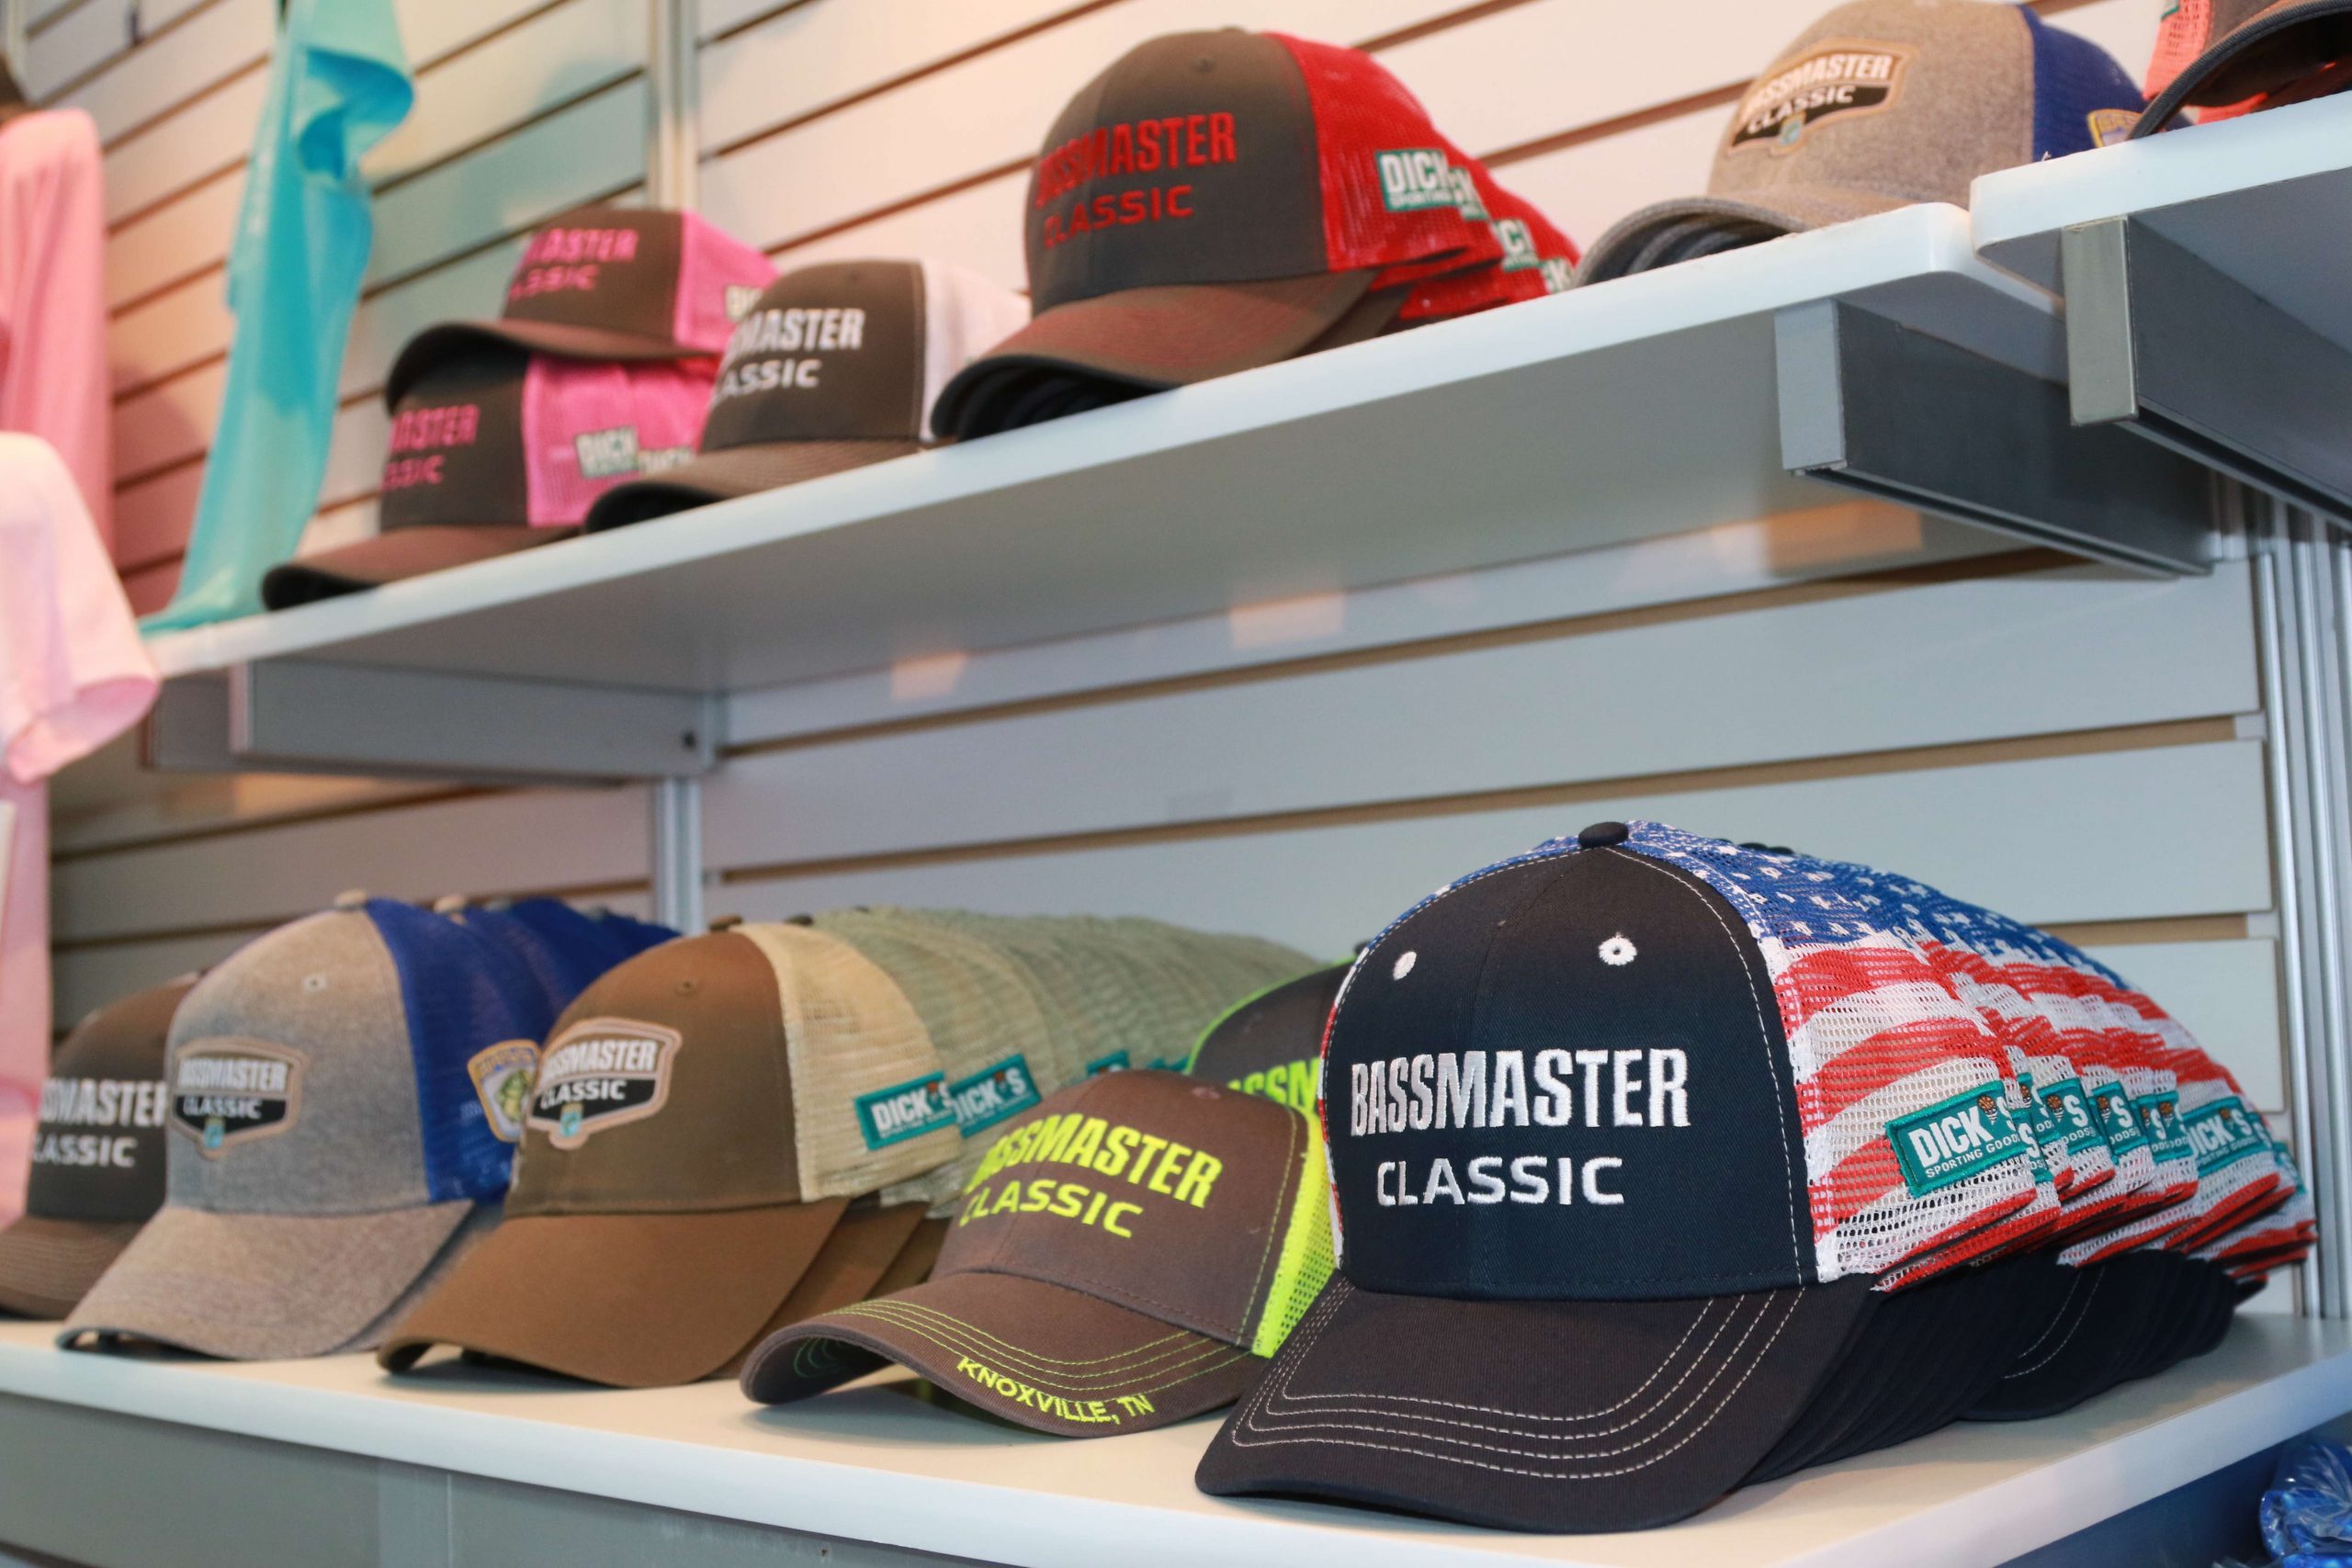 Expo visitors found a wide assortment of Bassmaster Classic items at the Bassmaster merchandise booth.